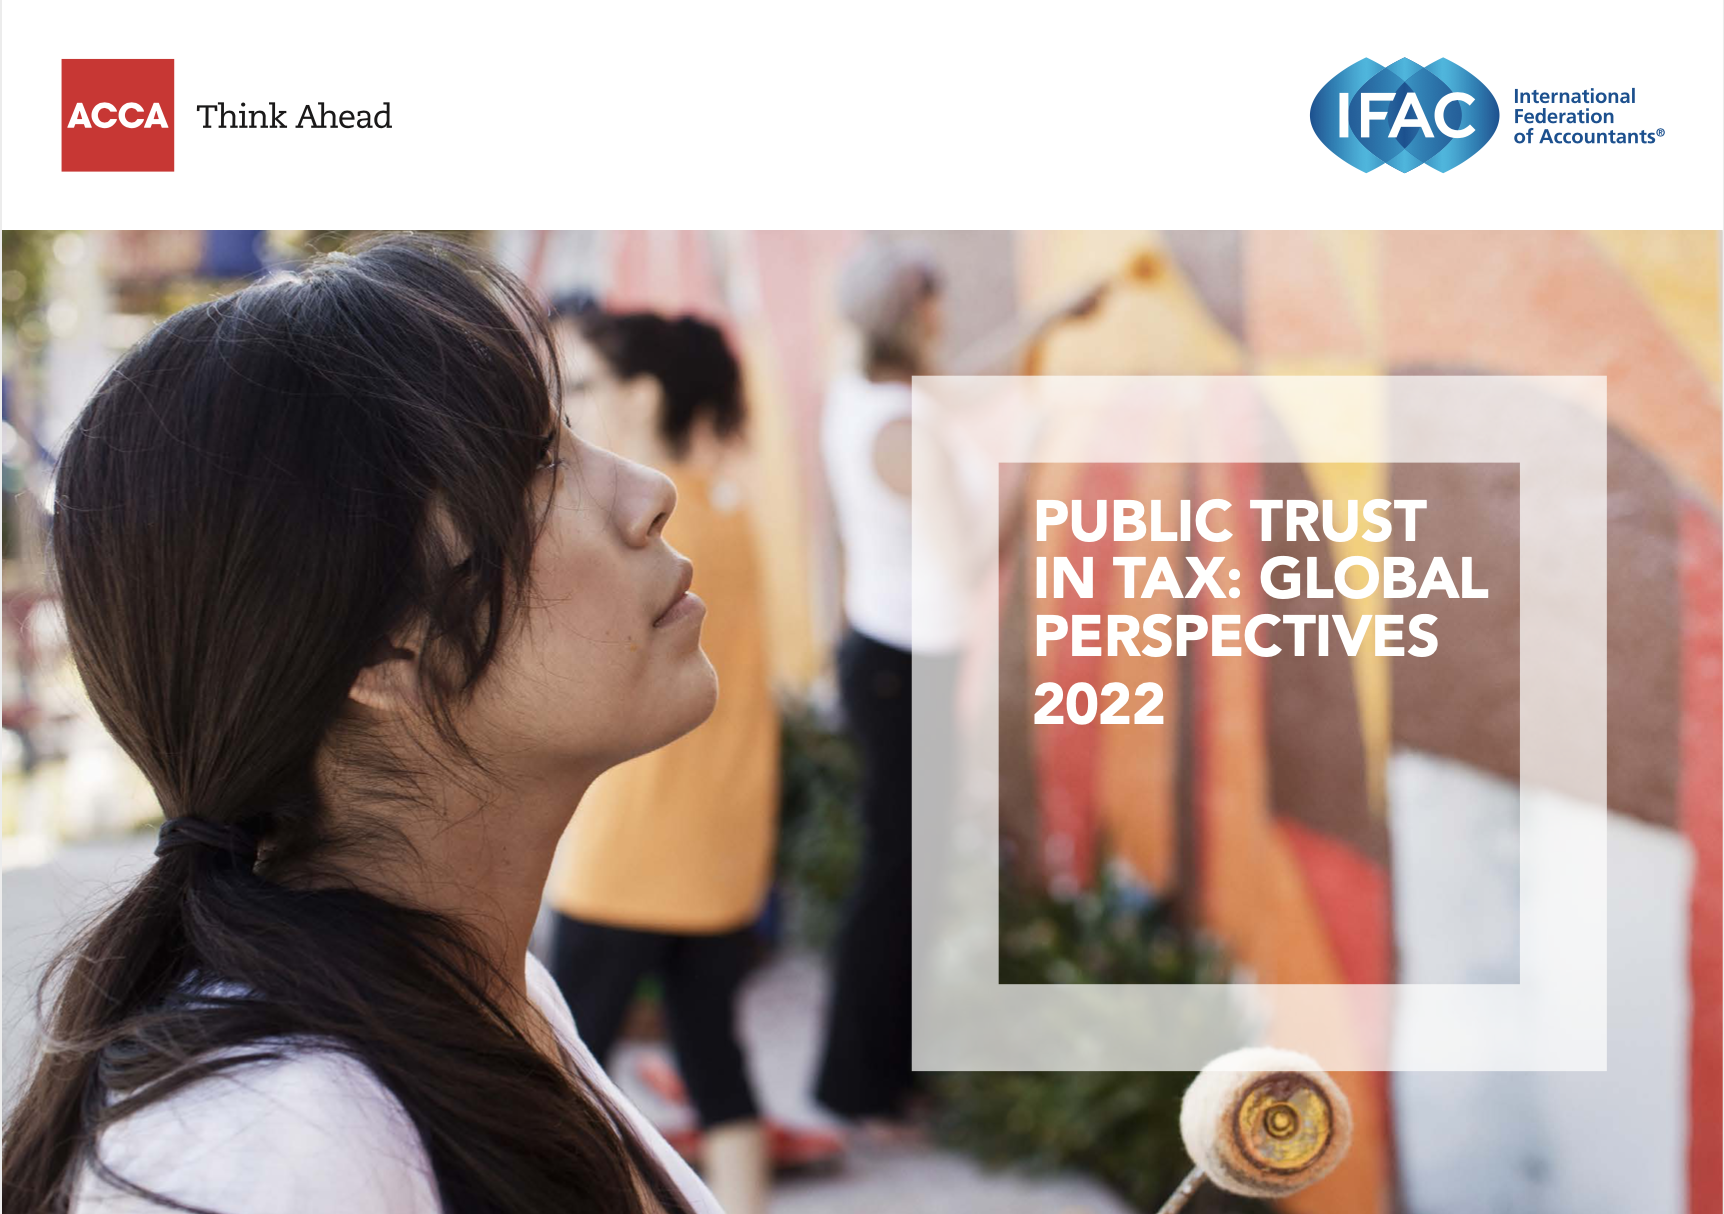 Vietnamese place high trust in tax system